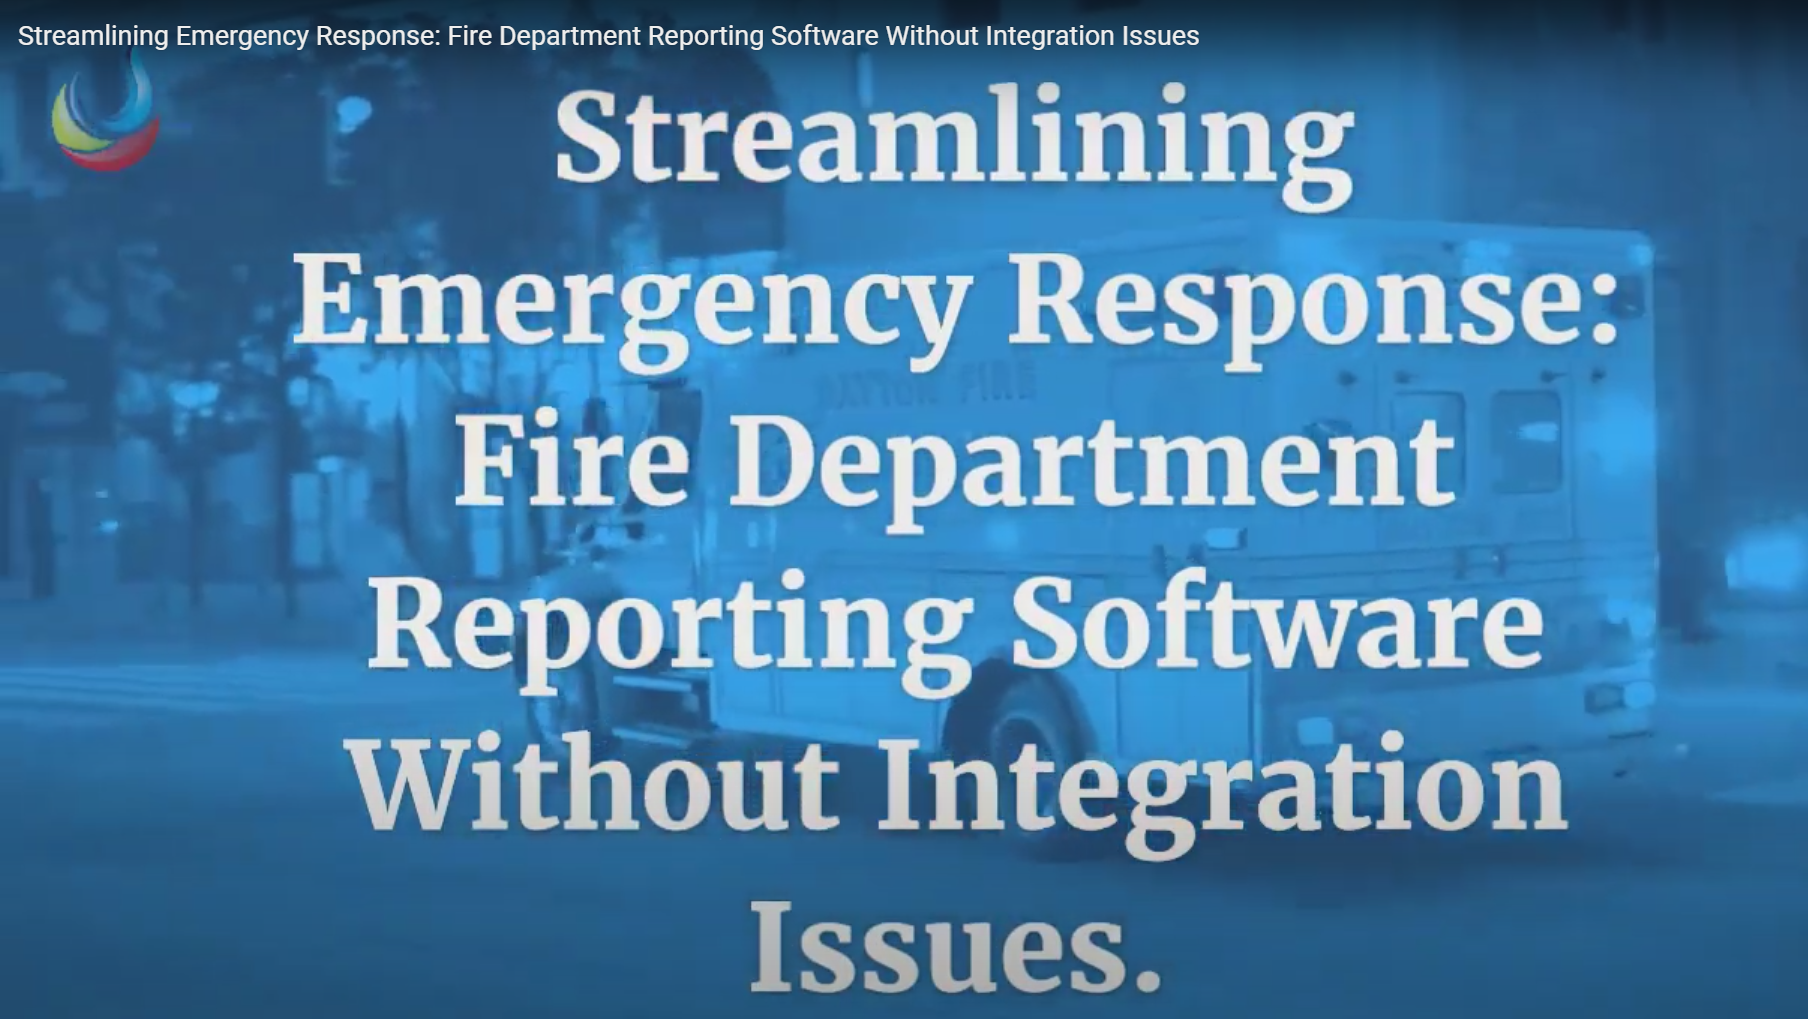 Fire Department Reporting Software Without Integration Issues